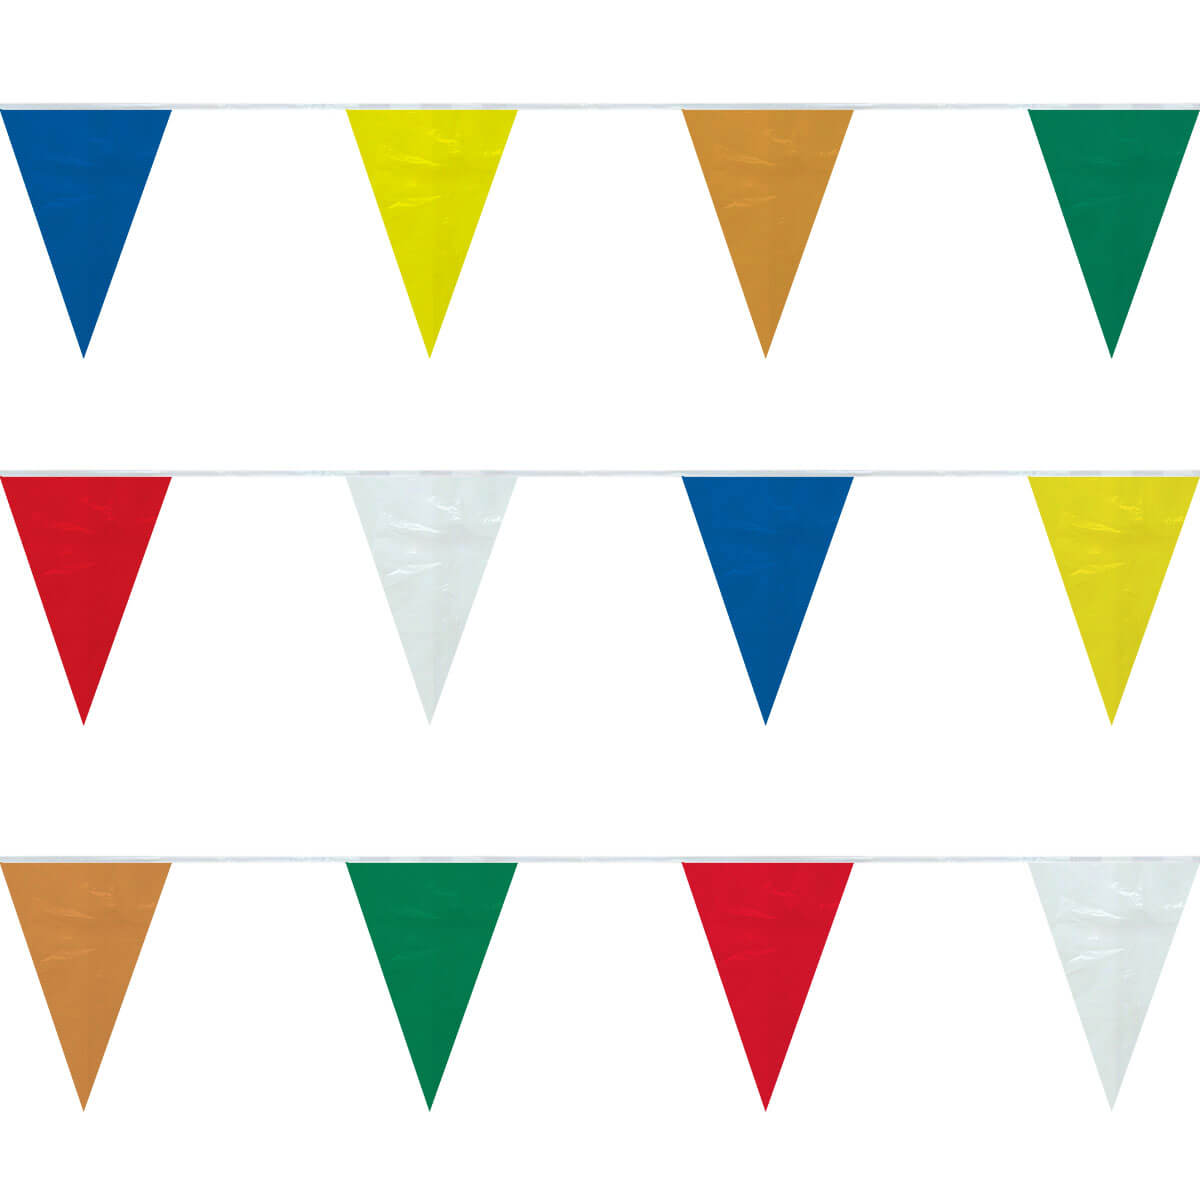 MULTI COLORED PENNANT STRING 50 FEET TRIANGLE FLAGS USA SHIPPING 22 PENNANTS 